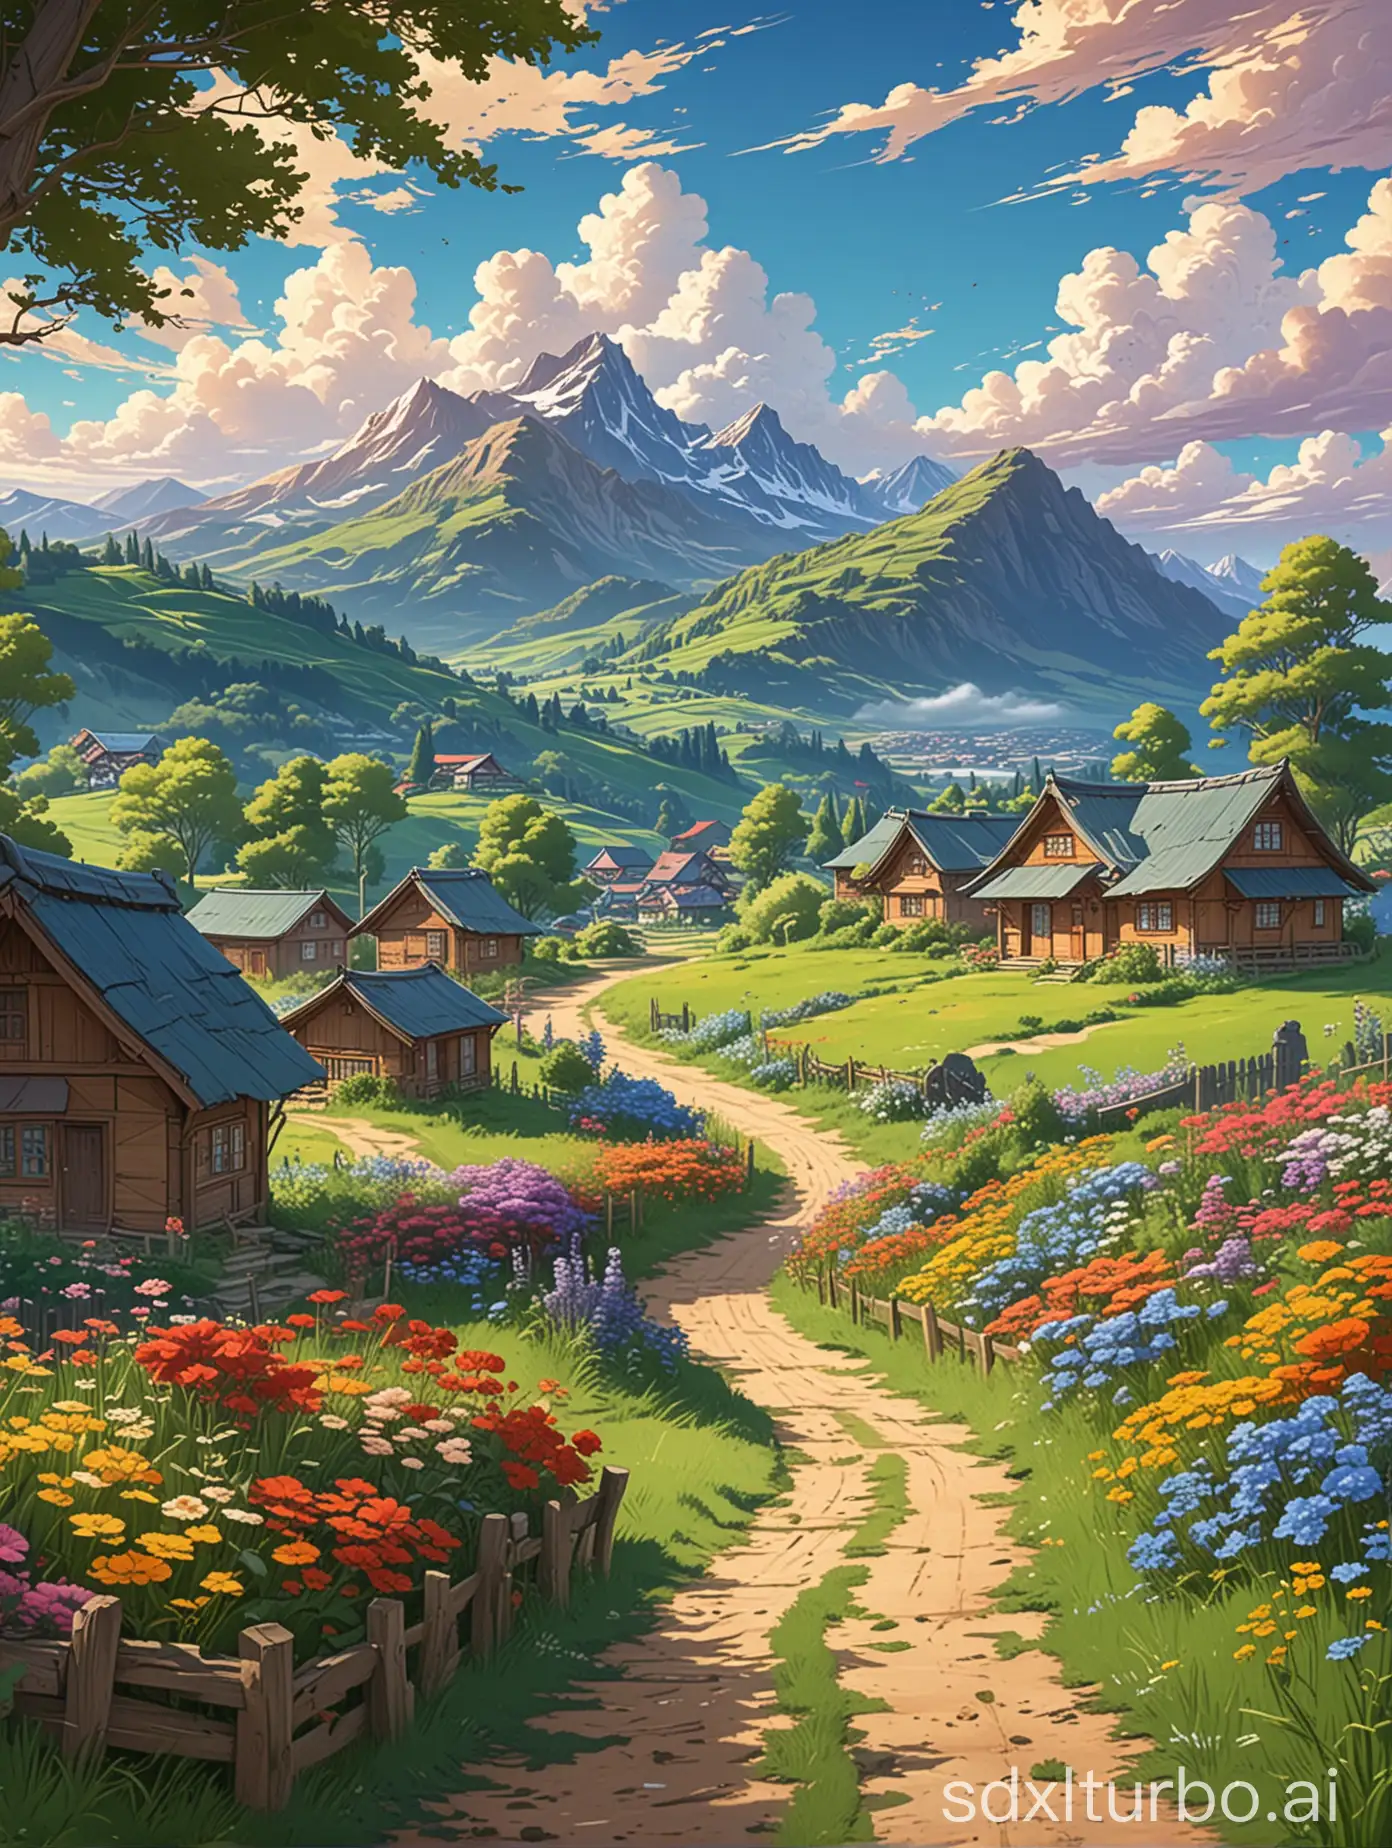 Anime-Countryside-Landscape-with-Colorful-Flowers-and-Wooden-Houses